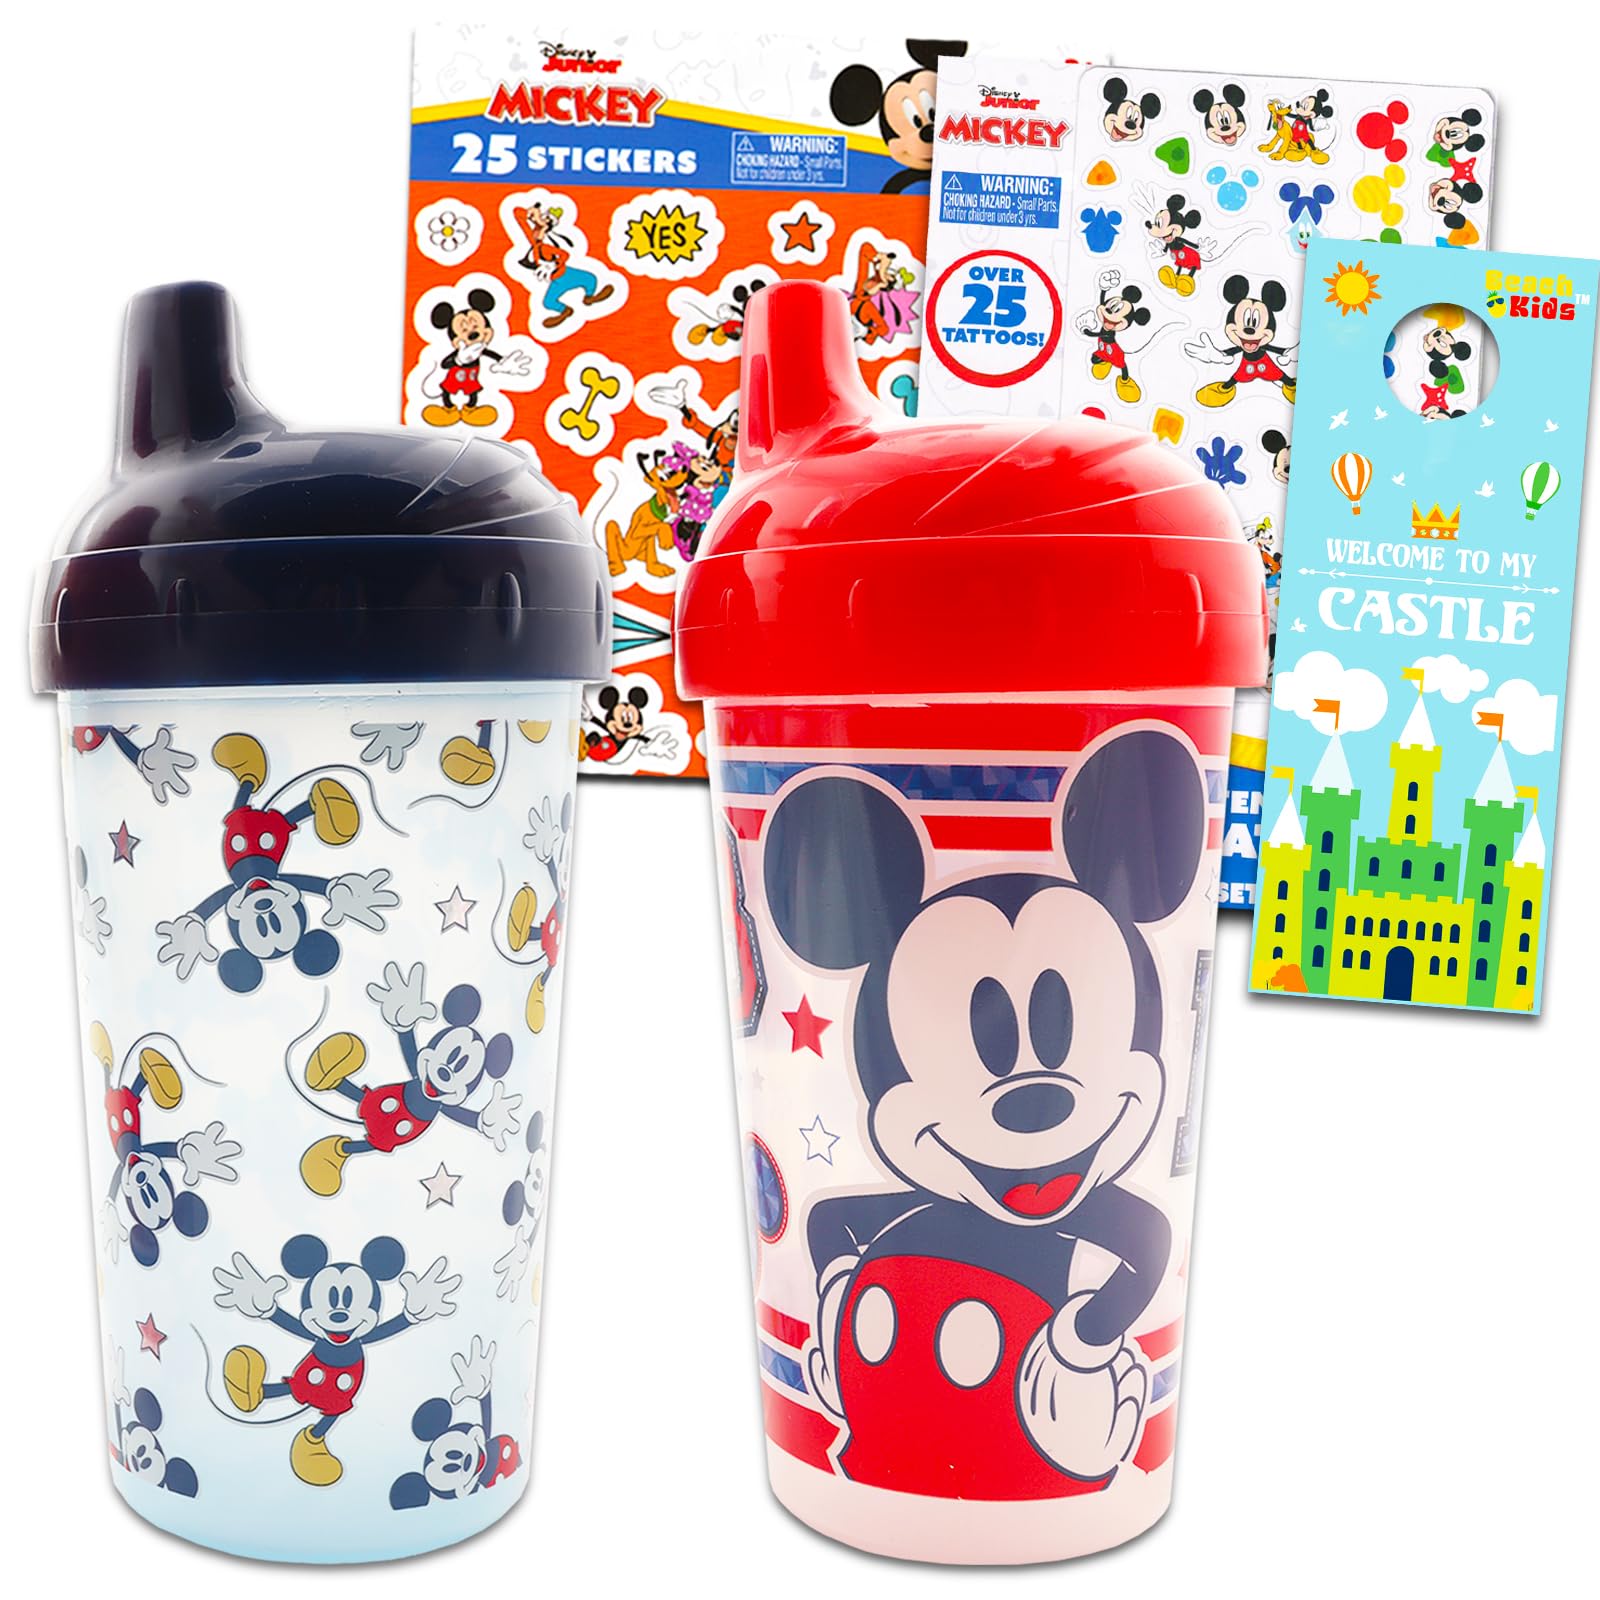 TODDLER SIPPY CUP BUNDLE- 3 CUPS